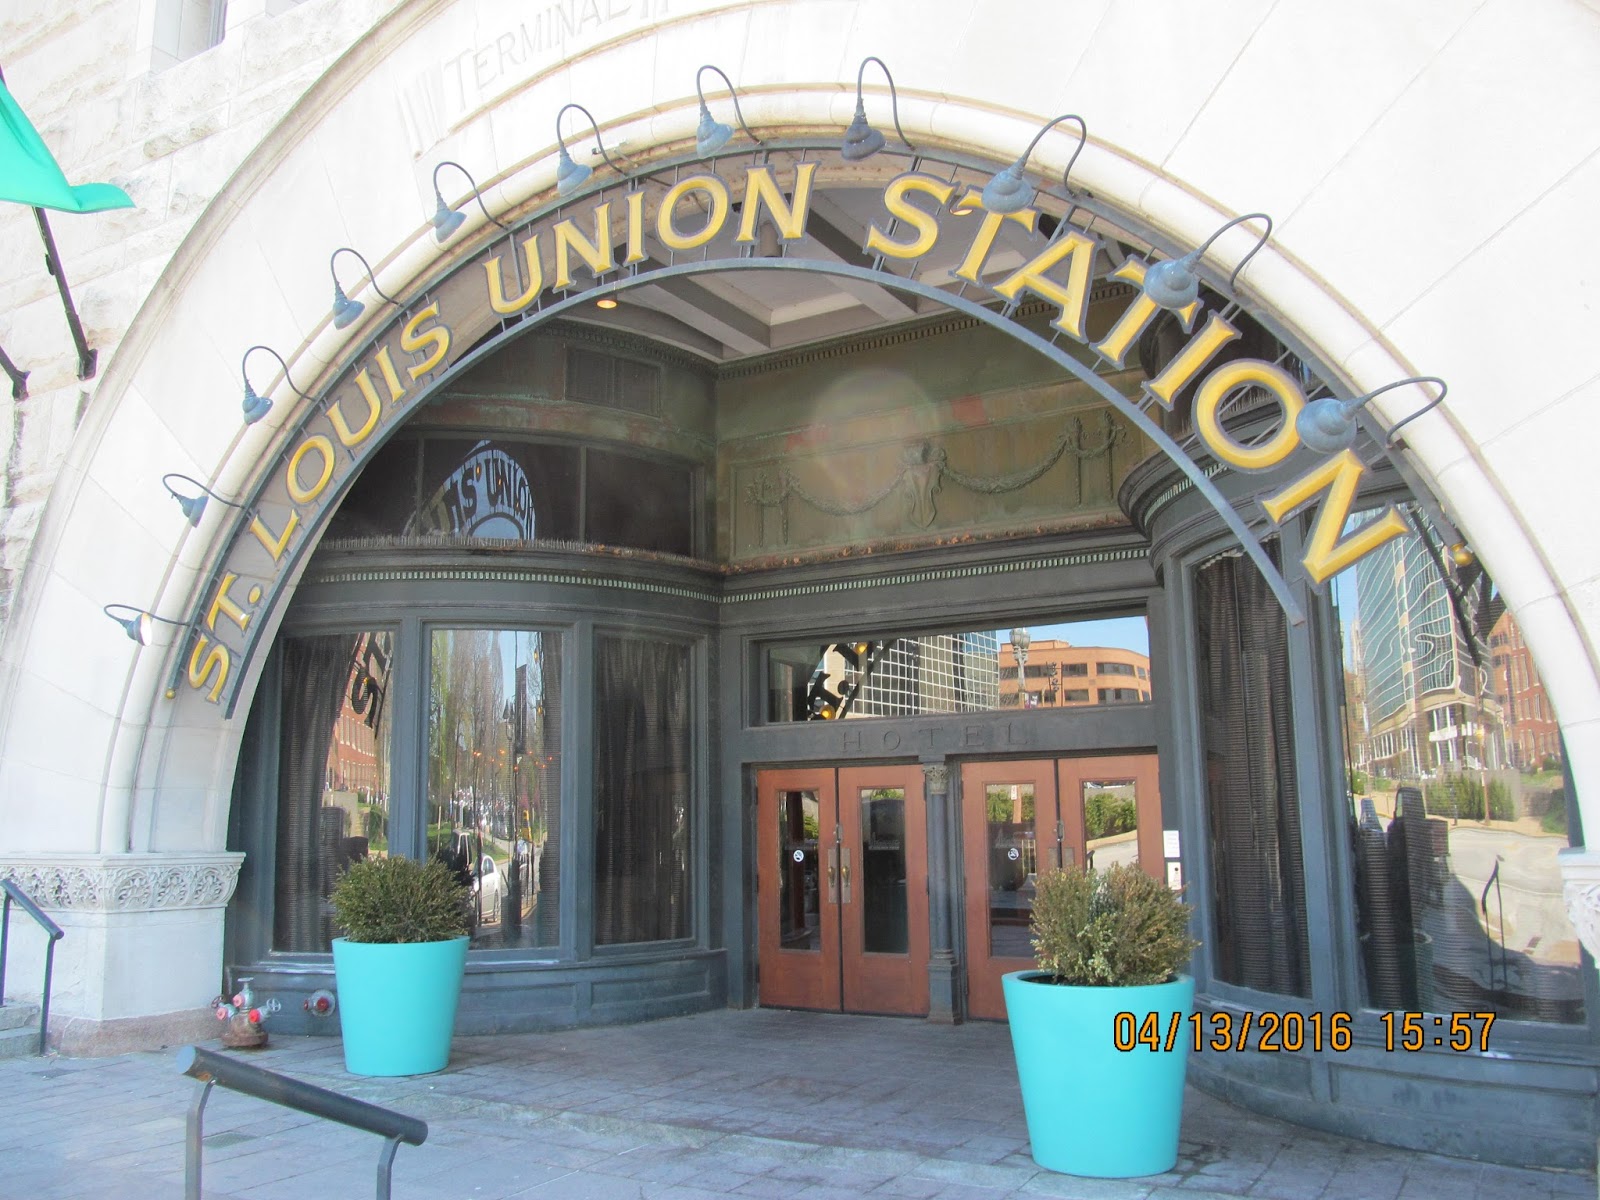 Trip to the Mall: St. Louis Union Station- Downtown STL